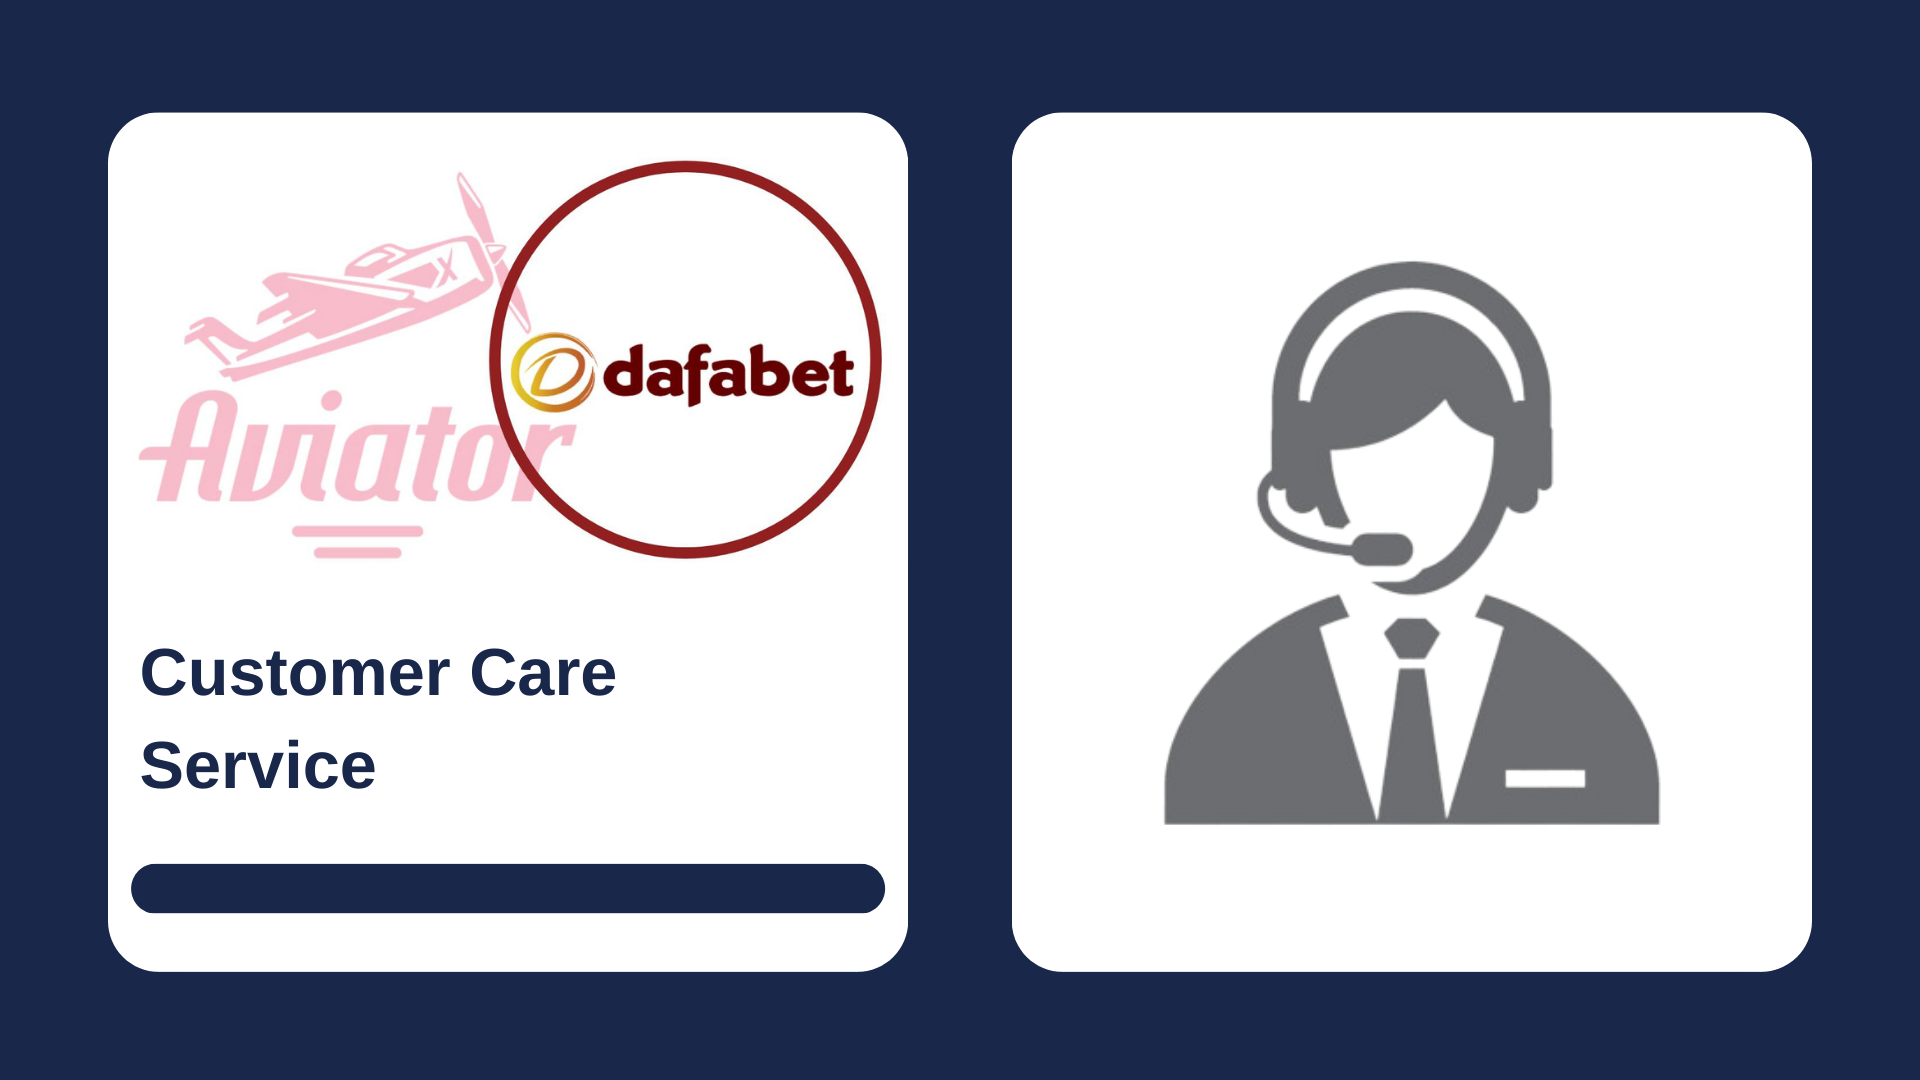 First picture showing Aviator and Dafabet logos, and second - man with headset